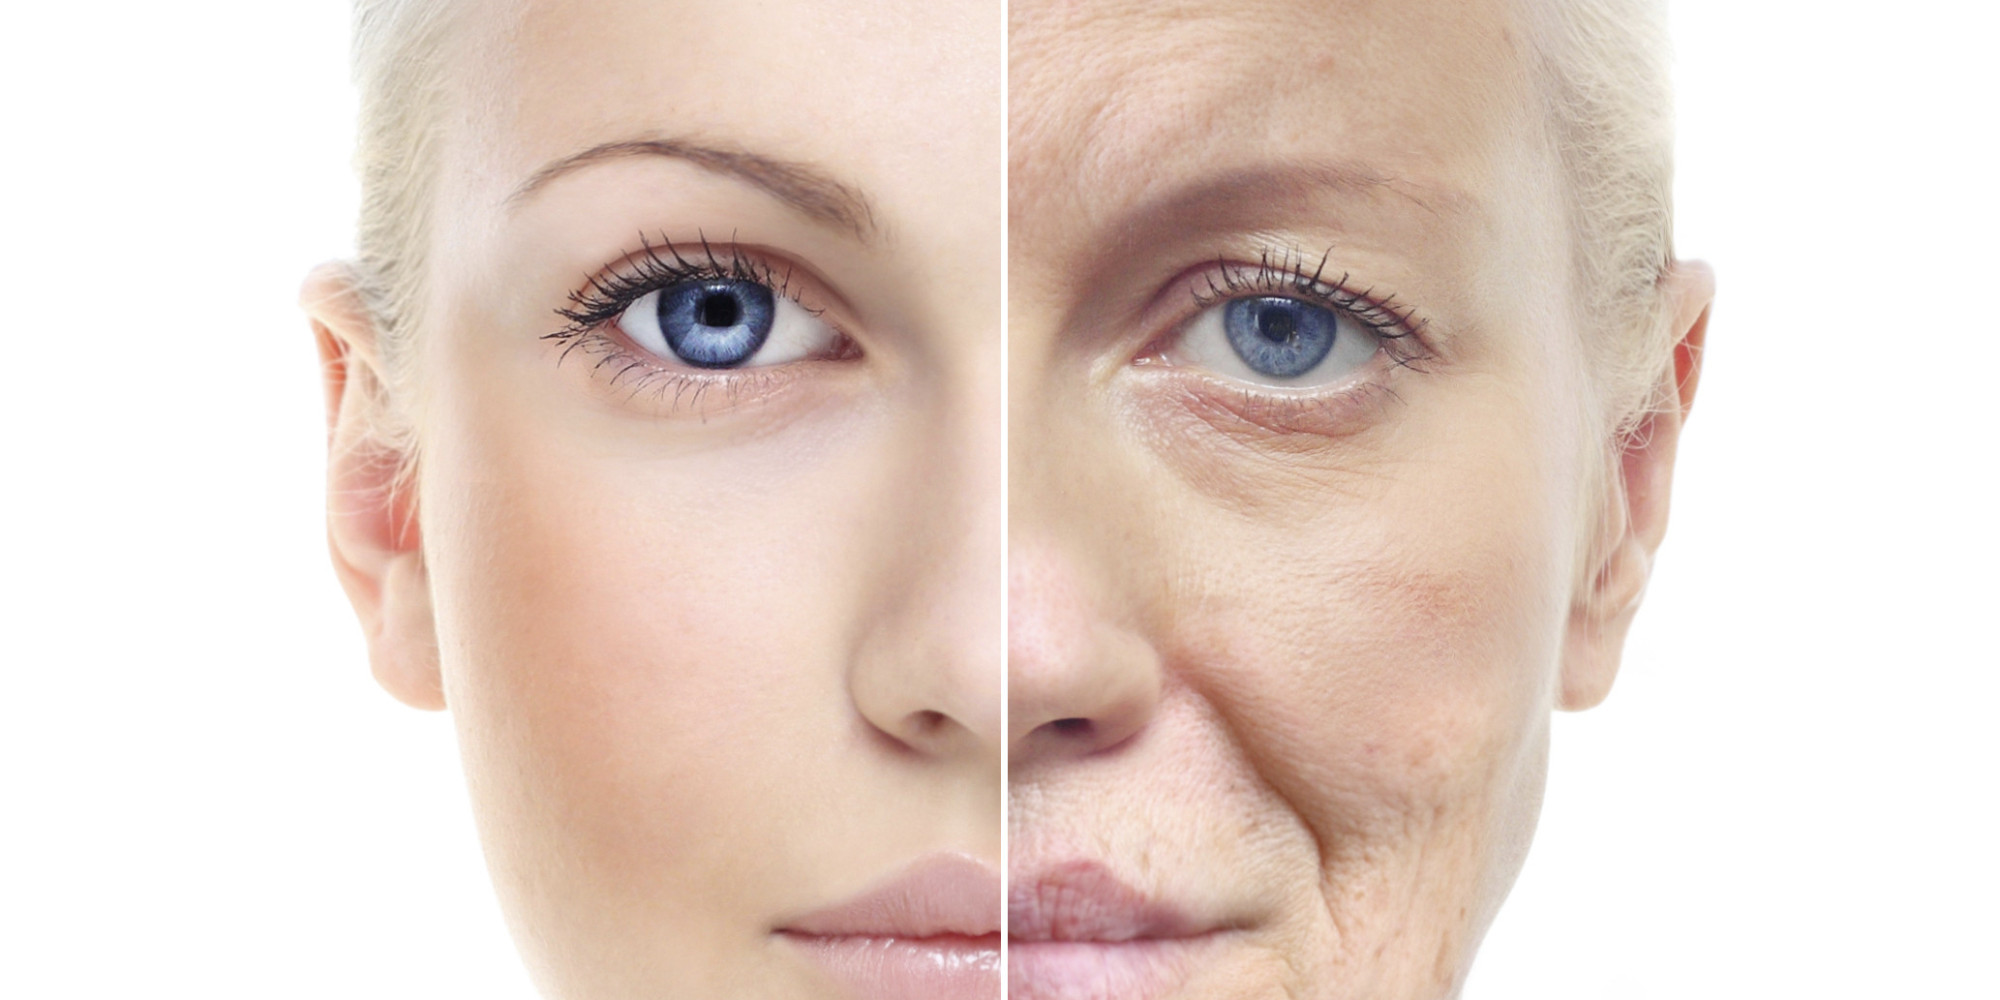 Signs of Aging and Inflammation